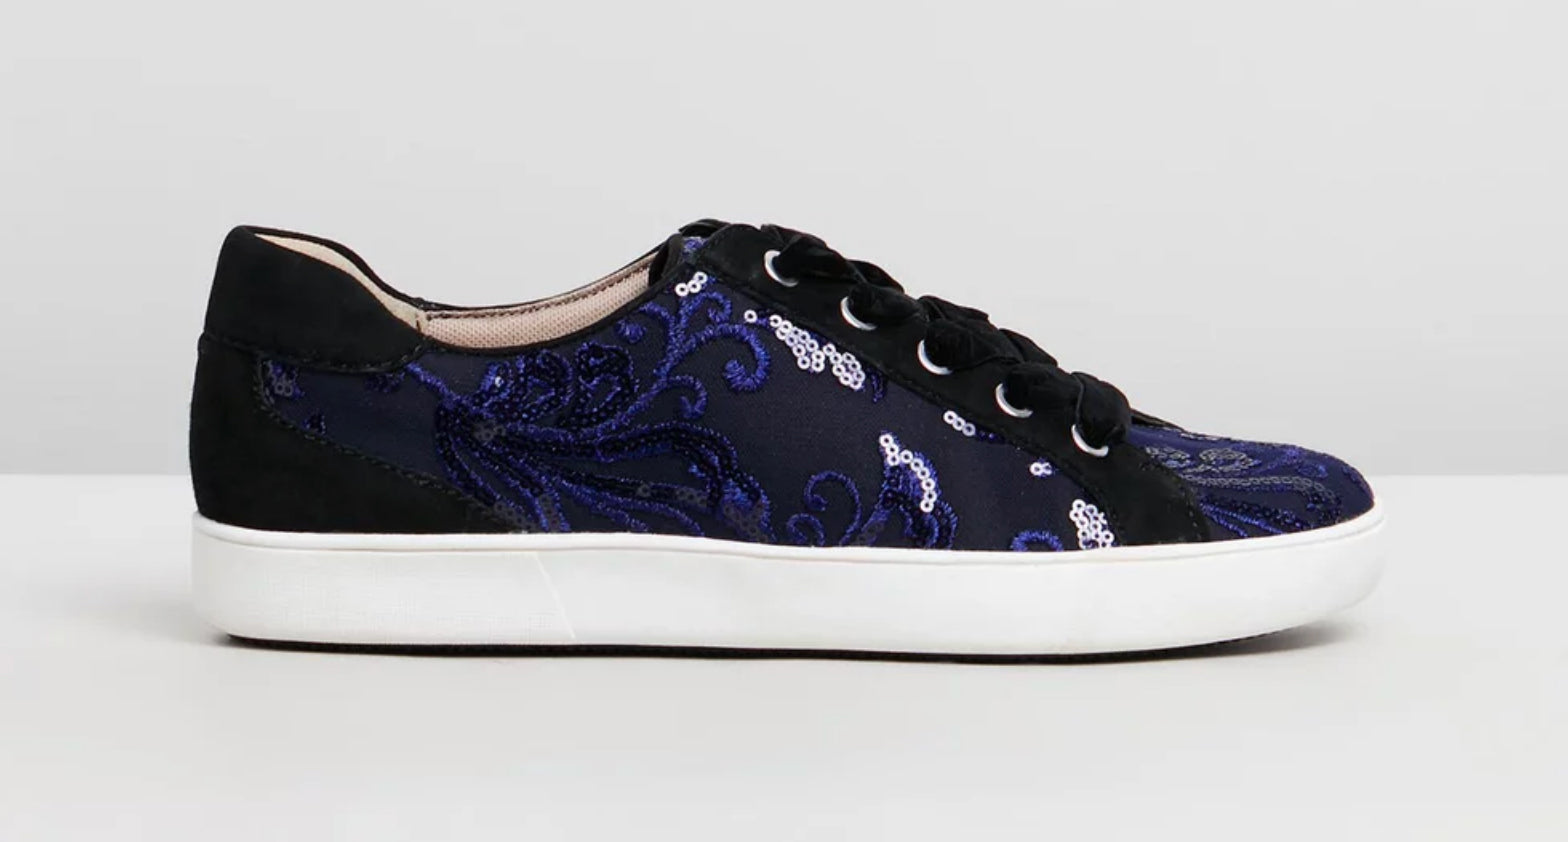 Naturalizer - Blue navy and black 'Morrison' sneakers shoes